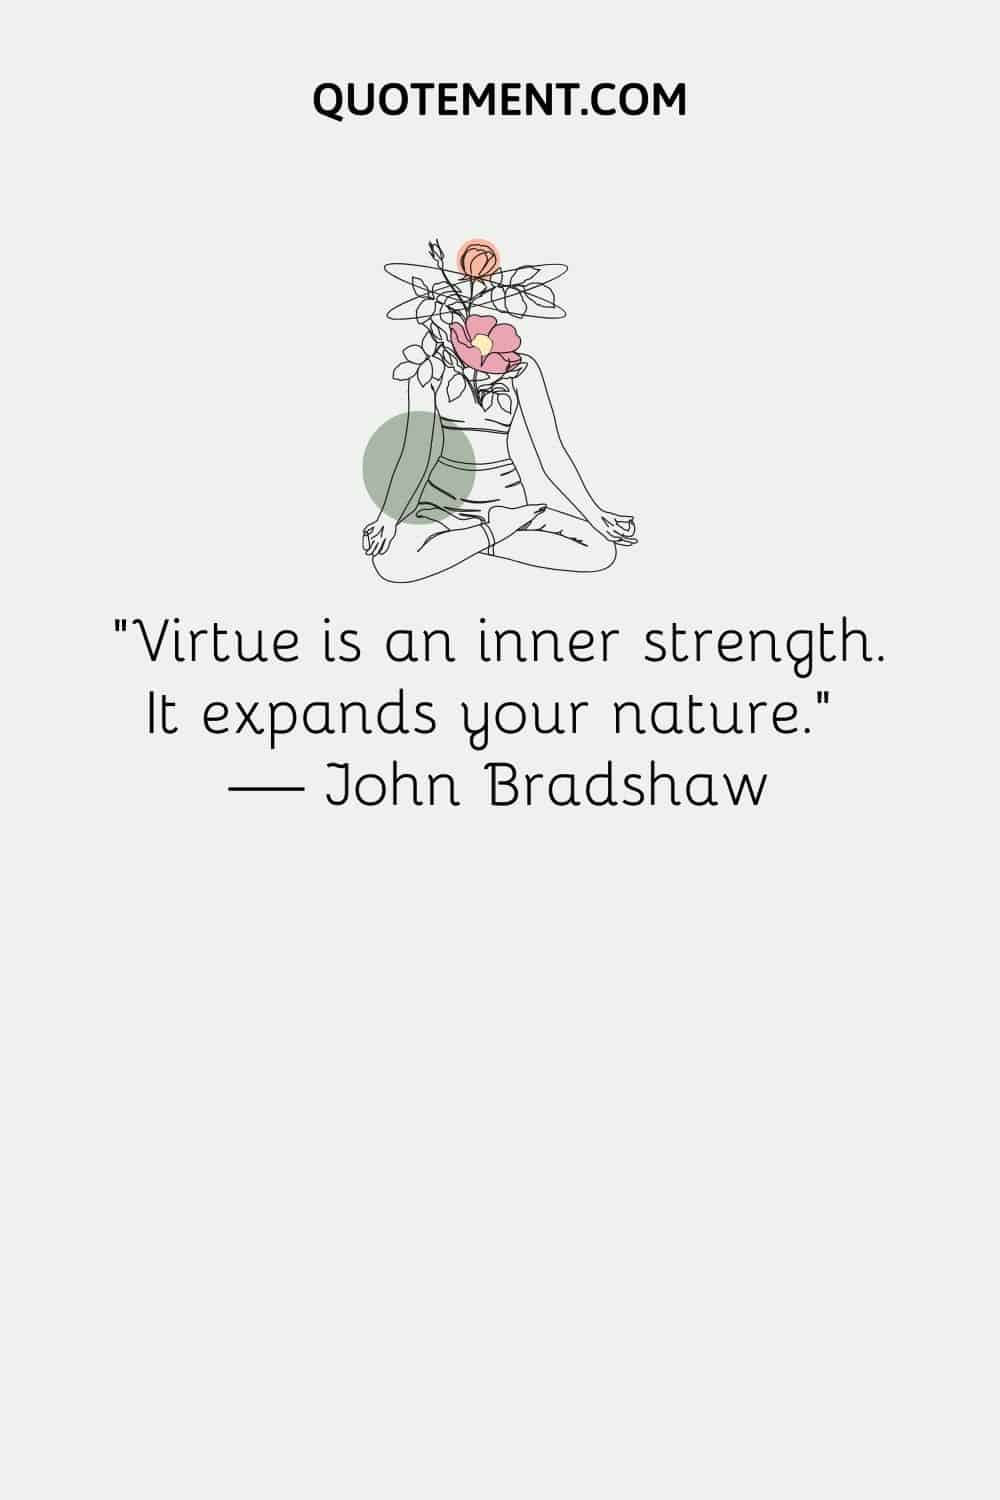 “Virtue is an inner strength. It expands your nature.” ― John Bradshaw